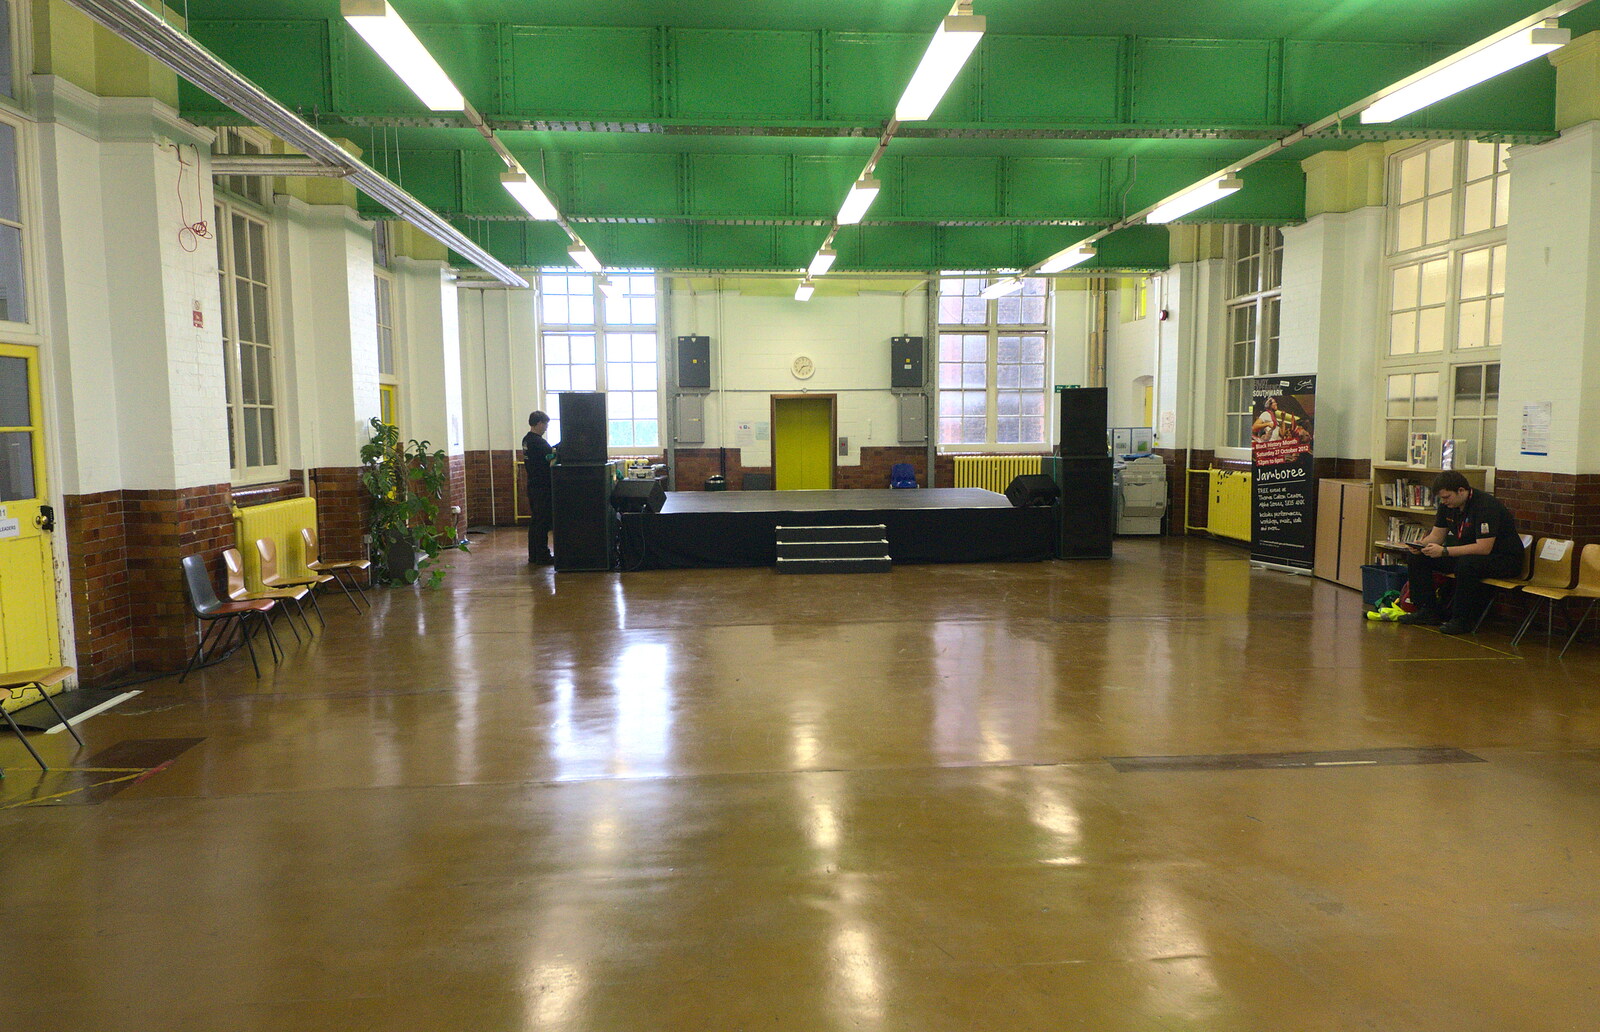 Peckham Community Centre, with not much happening from Another Trip to Peckham, Southwark, London - 28th October 2012